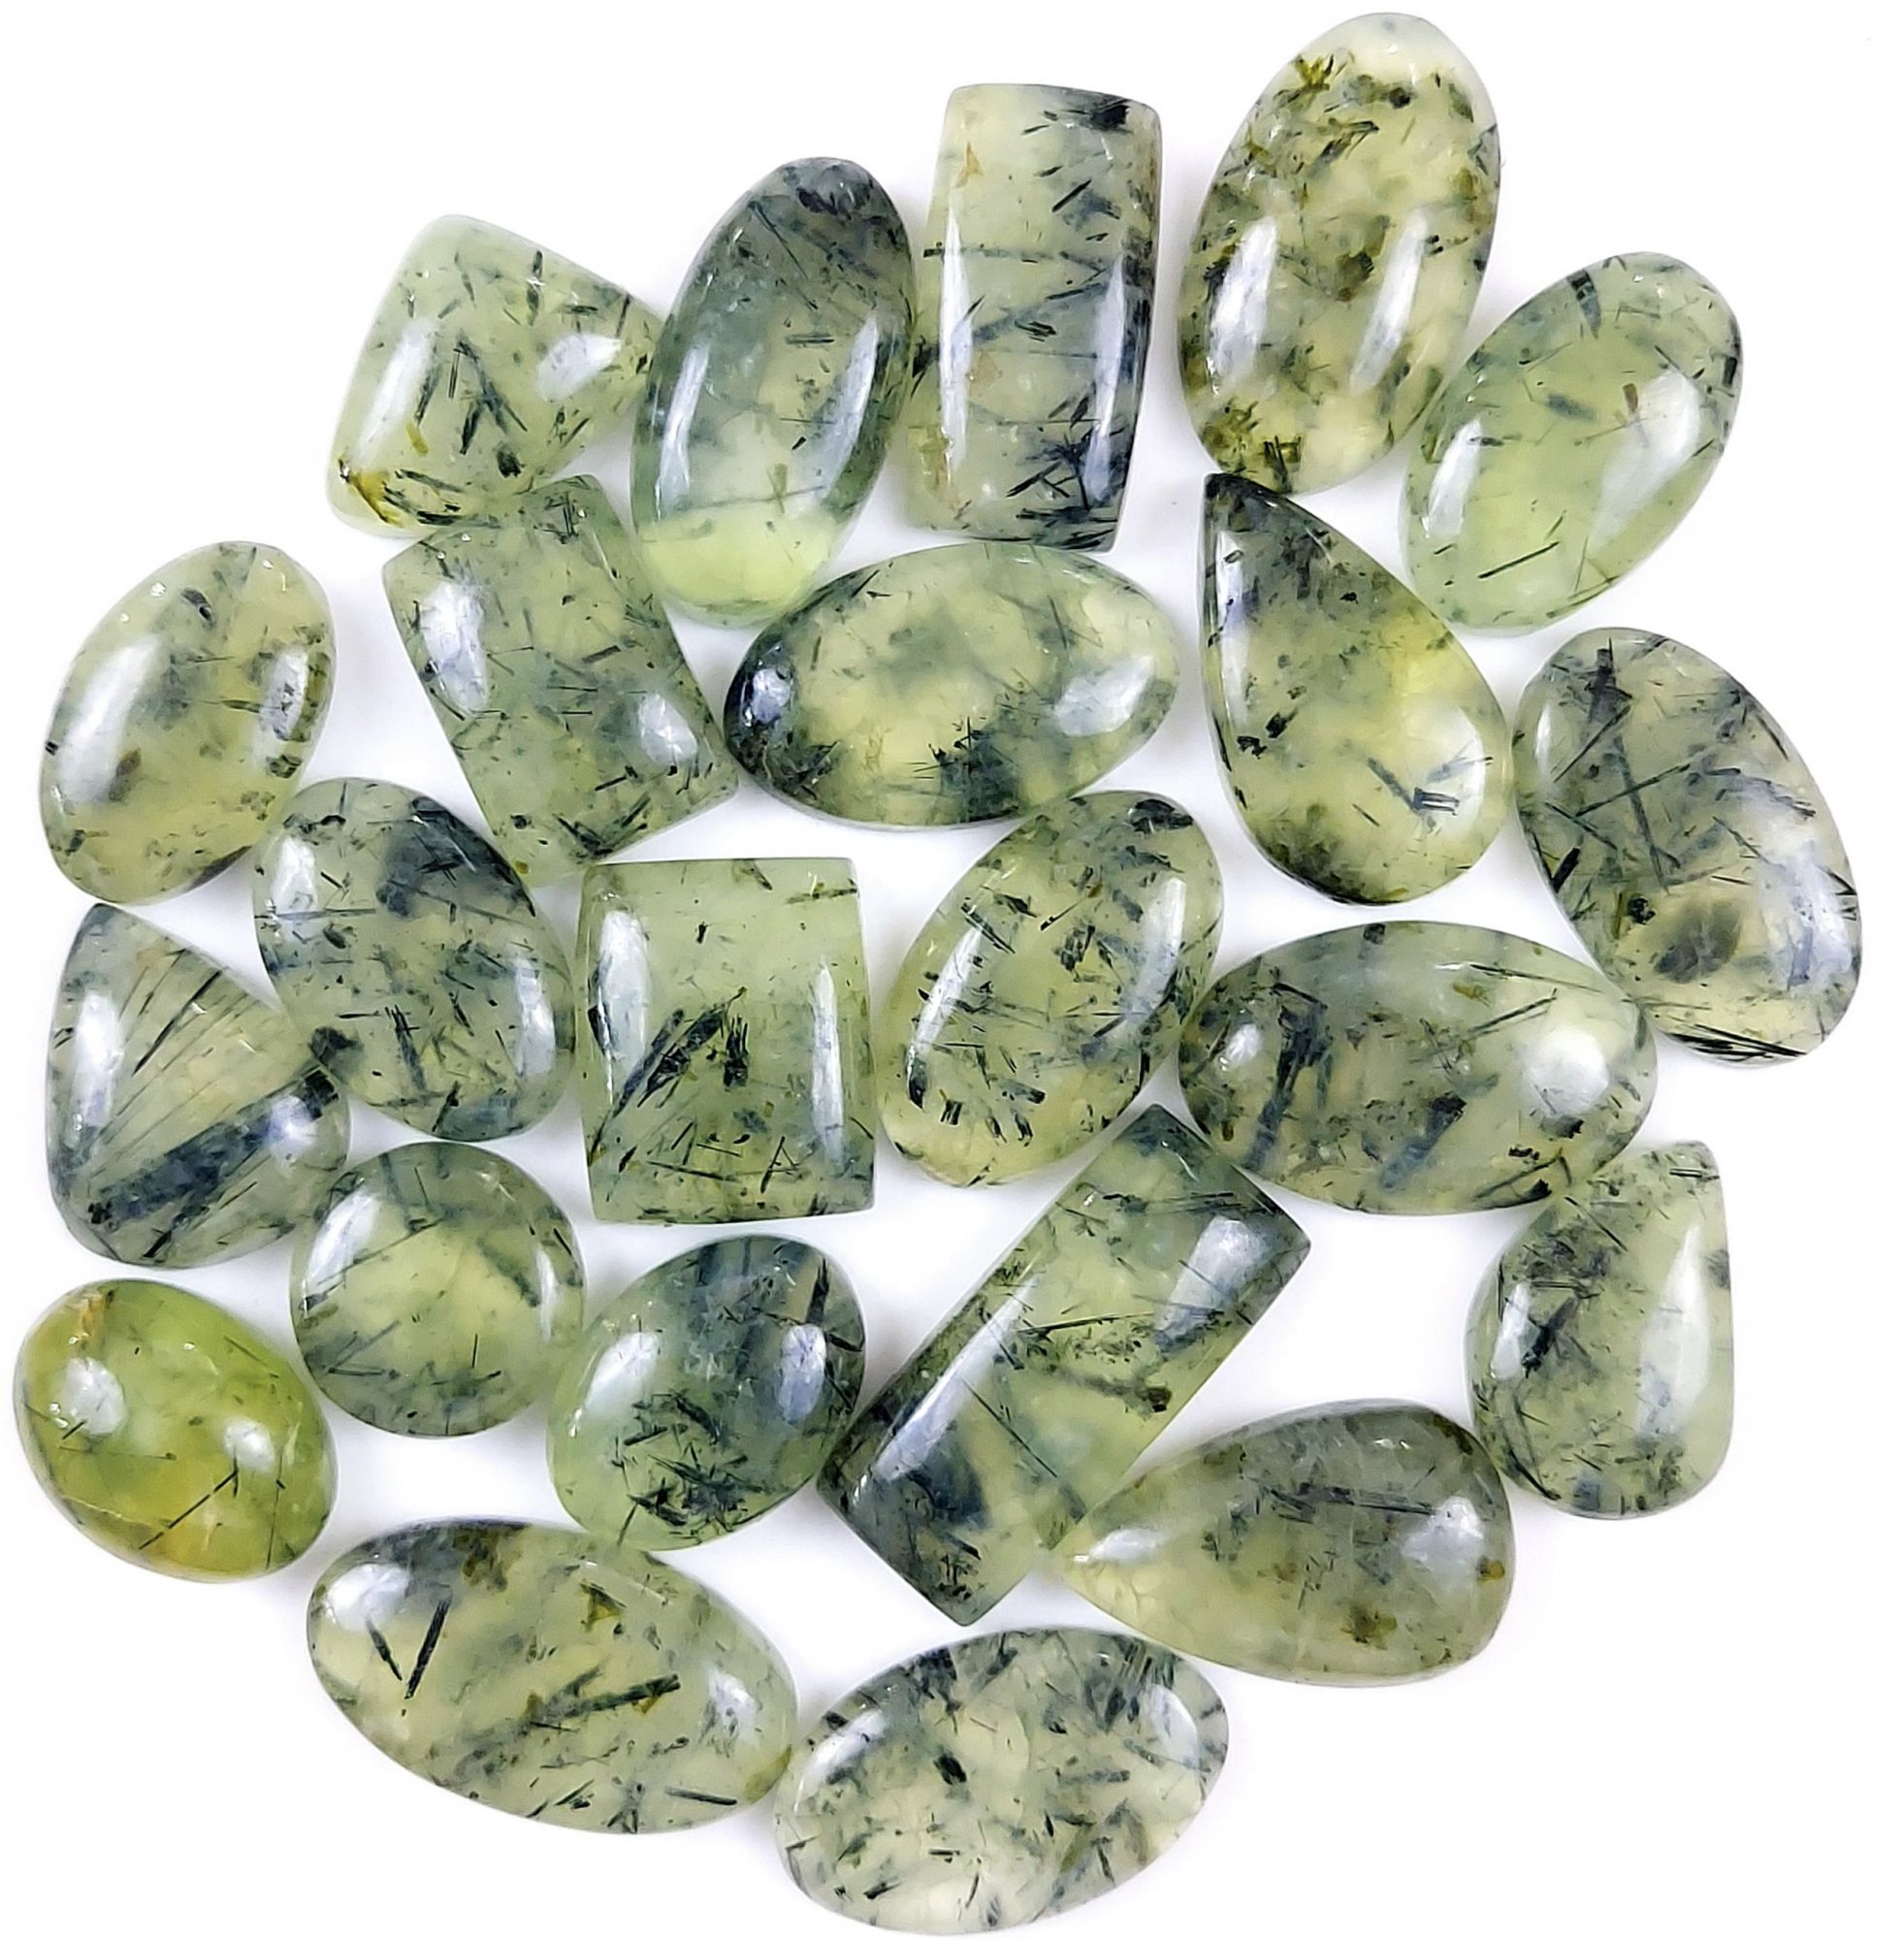 23Pcs 714Cts Natural Green Prehnite Loose Cabochon Gemstone Lot For Jewelry Making  30x12 20x14mm#1228